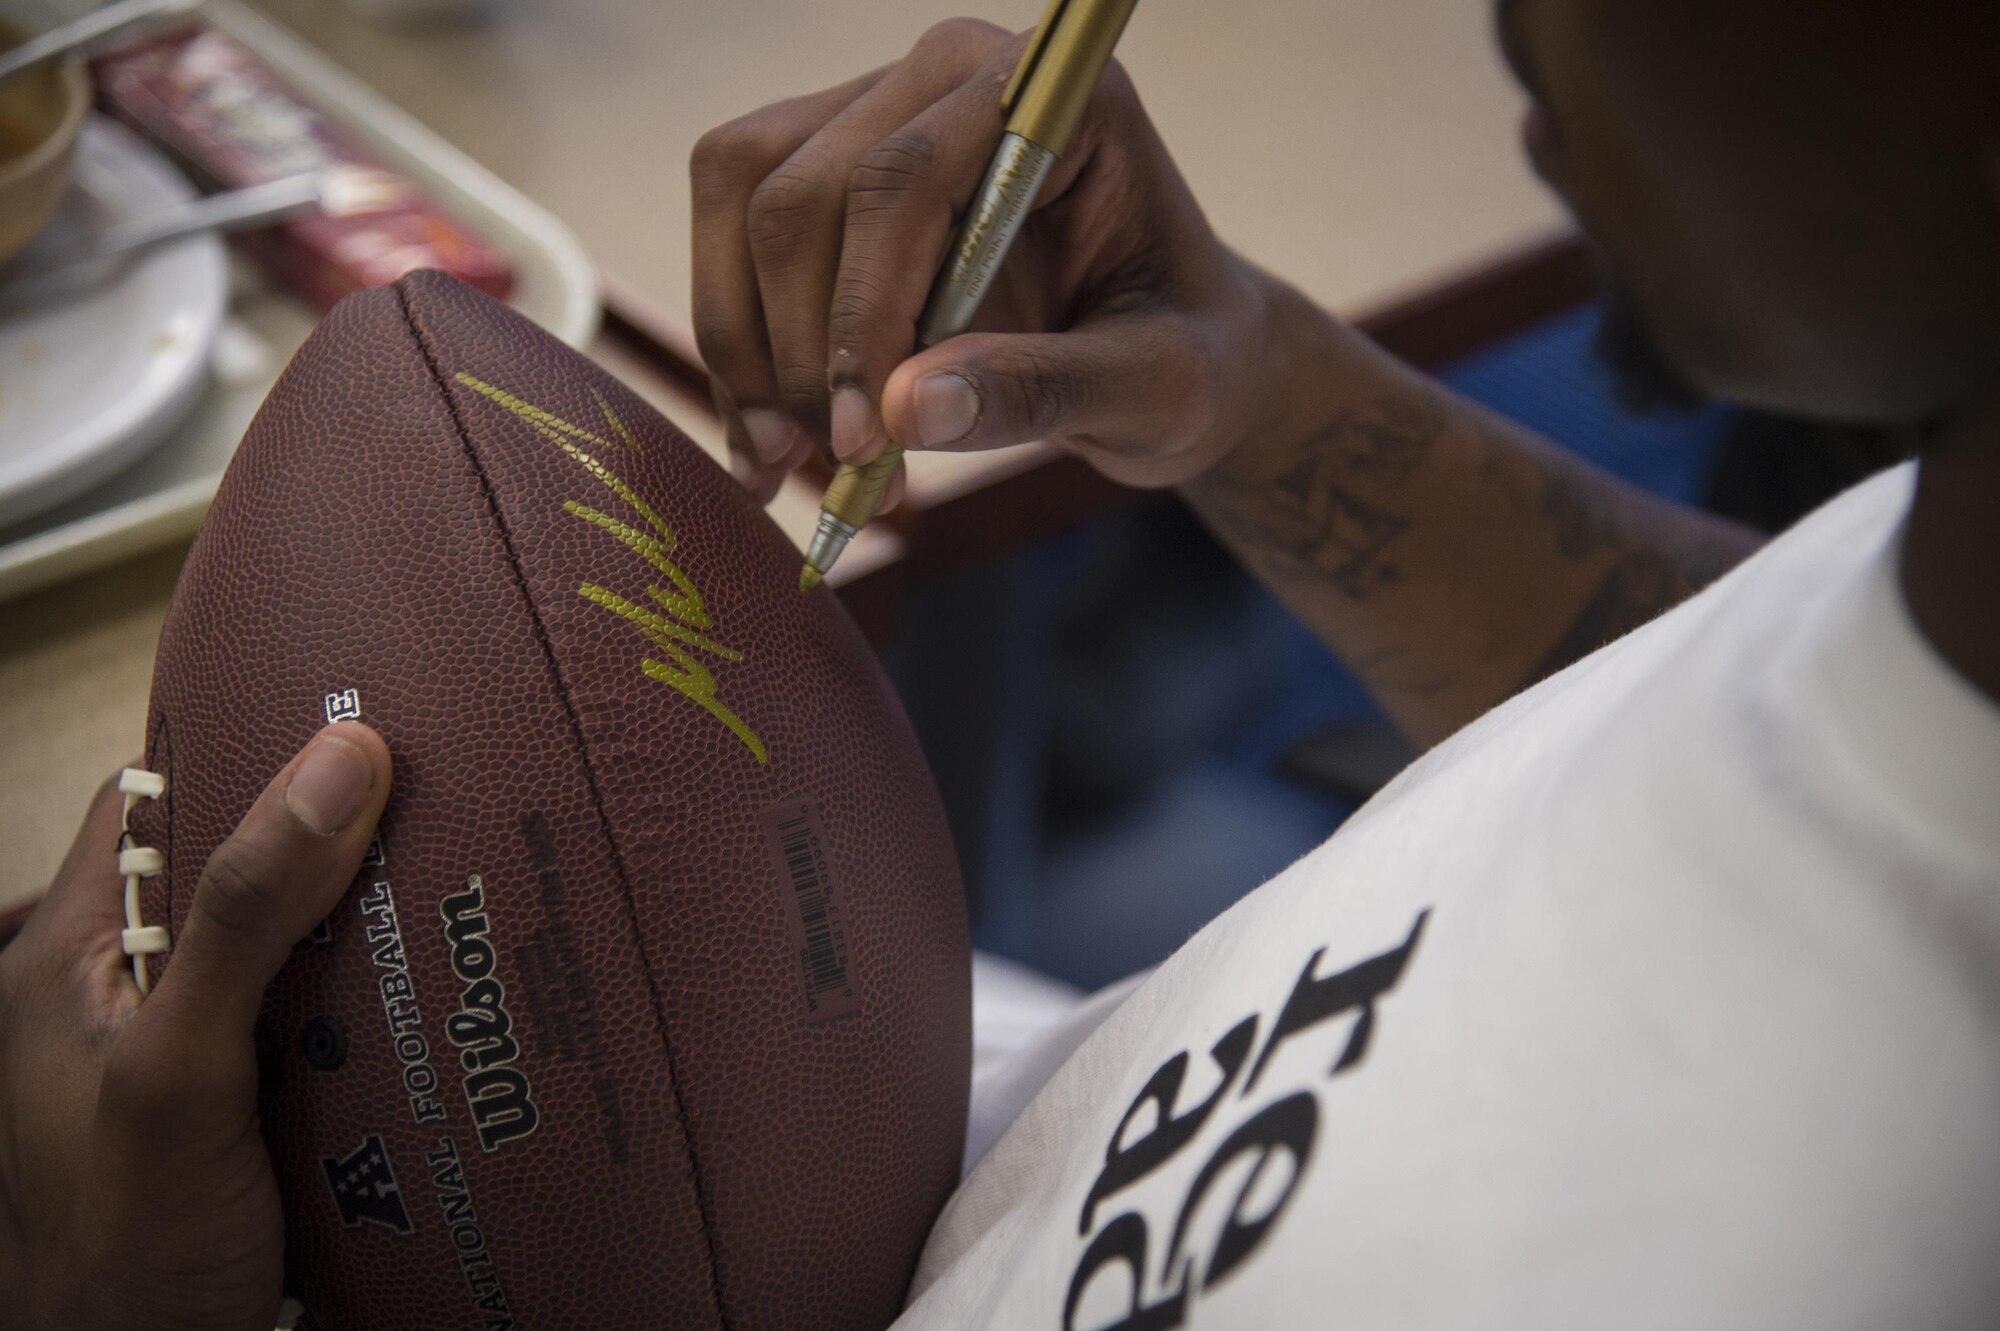 Malcolm Mitchell, New England Patriots’ wide receiver and Super Bowl LI Champion, signs a football during a visit March 7, 2017, at Moody Air Force Base, Ga. Mitchell, a Valdosta native, got a glimpse of a typical day in the life of Moody Airmen. Mitchell also spent time with Airmen and signed autographs for local Patriots’ fans during his visit. (U.S. Air Force photo by Senior Airman Ceaira Young)